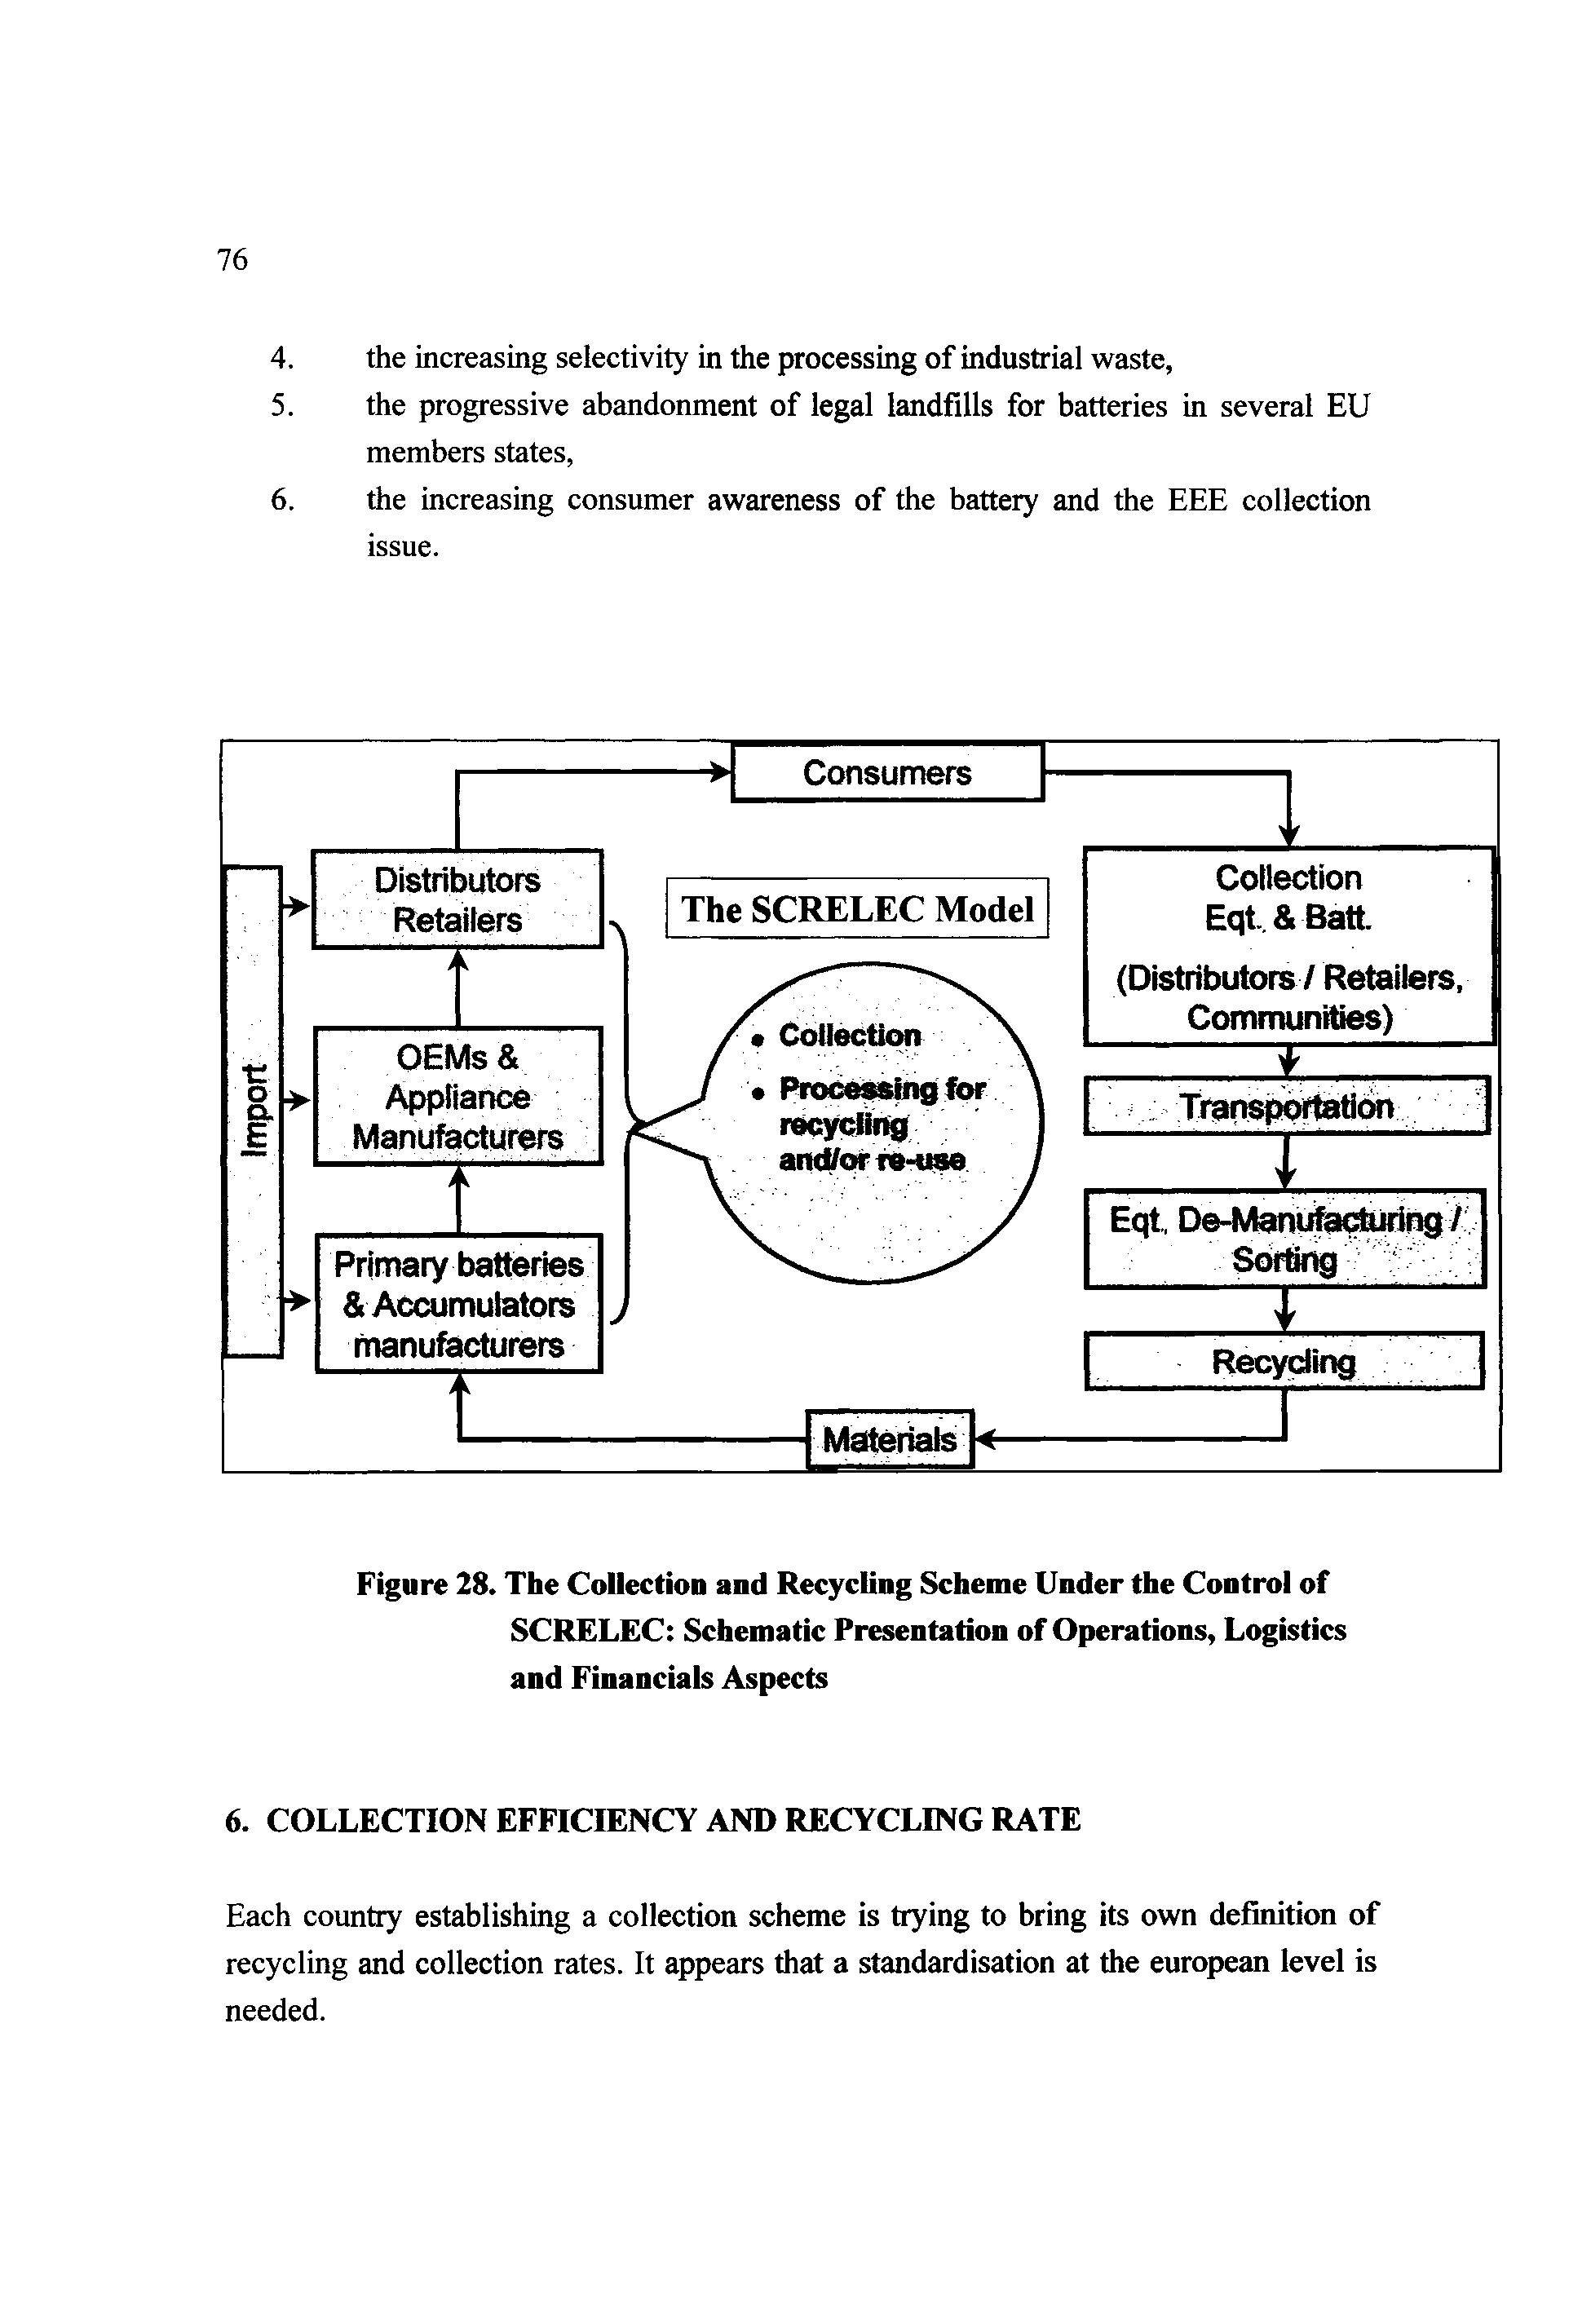 Figure 28. The Collection and Recycling Scheme Under the Control of SCRELEC Schematic Presentation of Operations, Logistics and Financials Aspects...